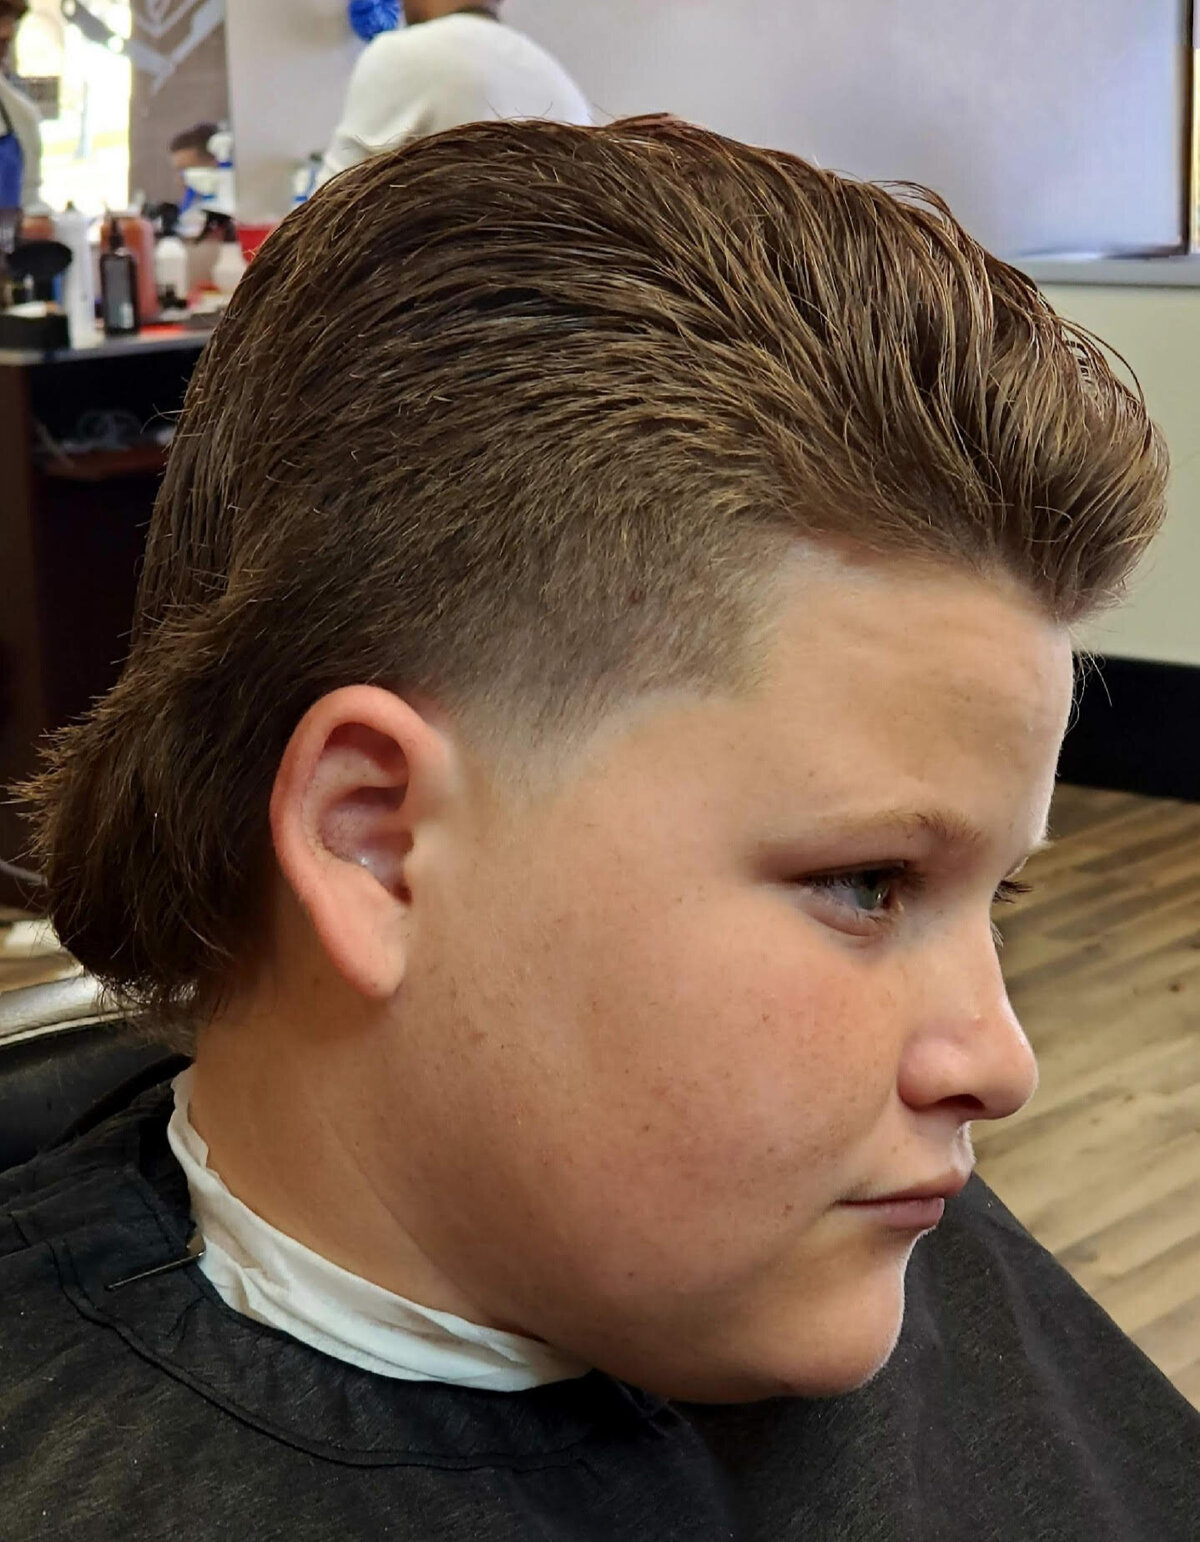 Customized Kid's Cut - Individual Style - Whos Your Barber in Venice, FL